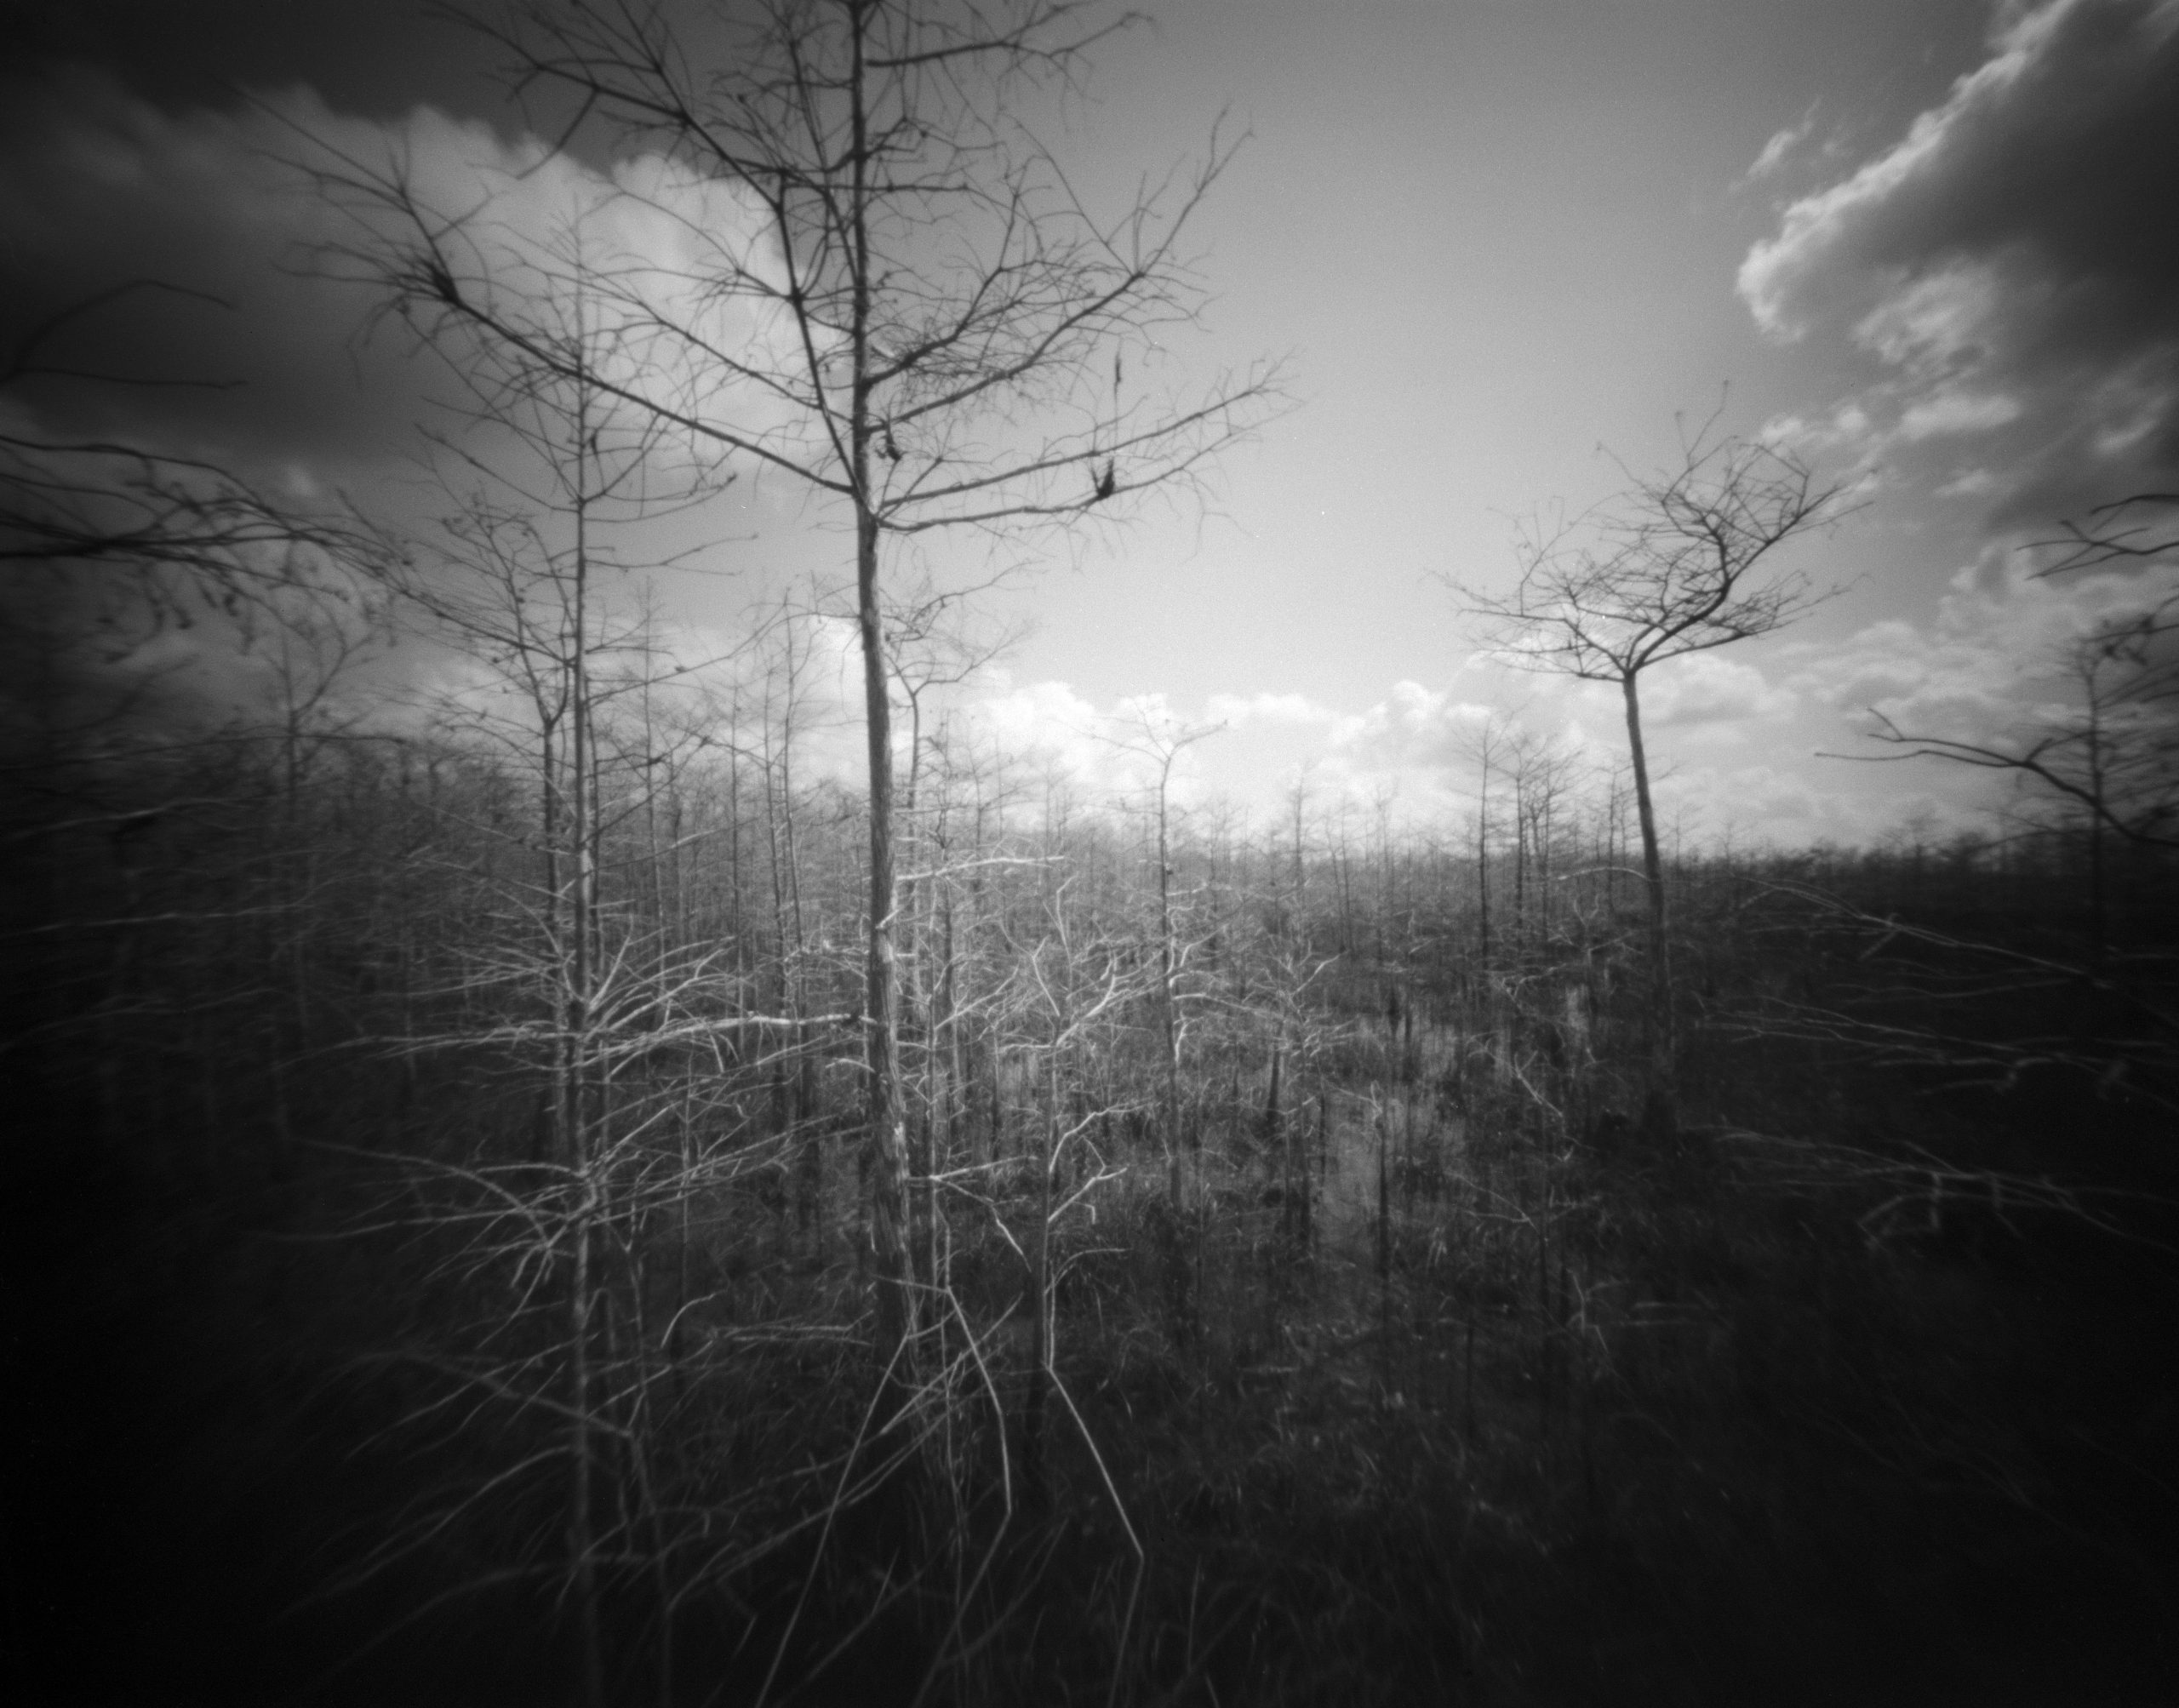 Everglades, Florida Pond cypress trees-2beautiful scene in the Everglades National Park  This image was captured with a home made large format pinhole camera with a 4 x 5 inch negative size film. No post processing was applied whatsoever. A pinhole camera has no lens, no viewfinder, and no light meter, and no electronics. Just a hole in a box.